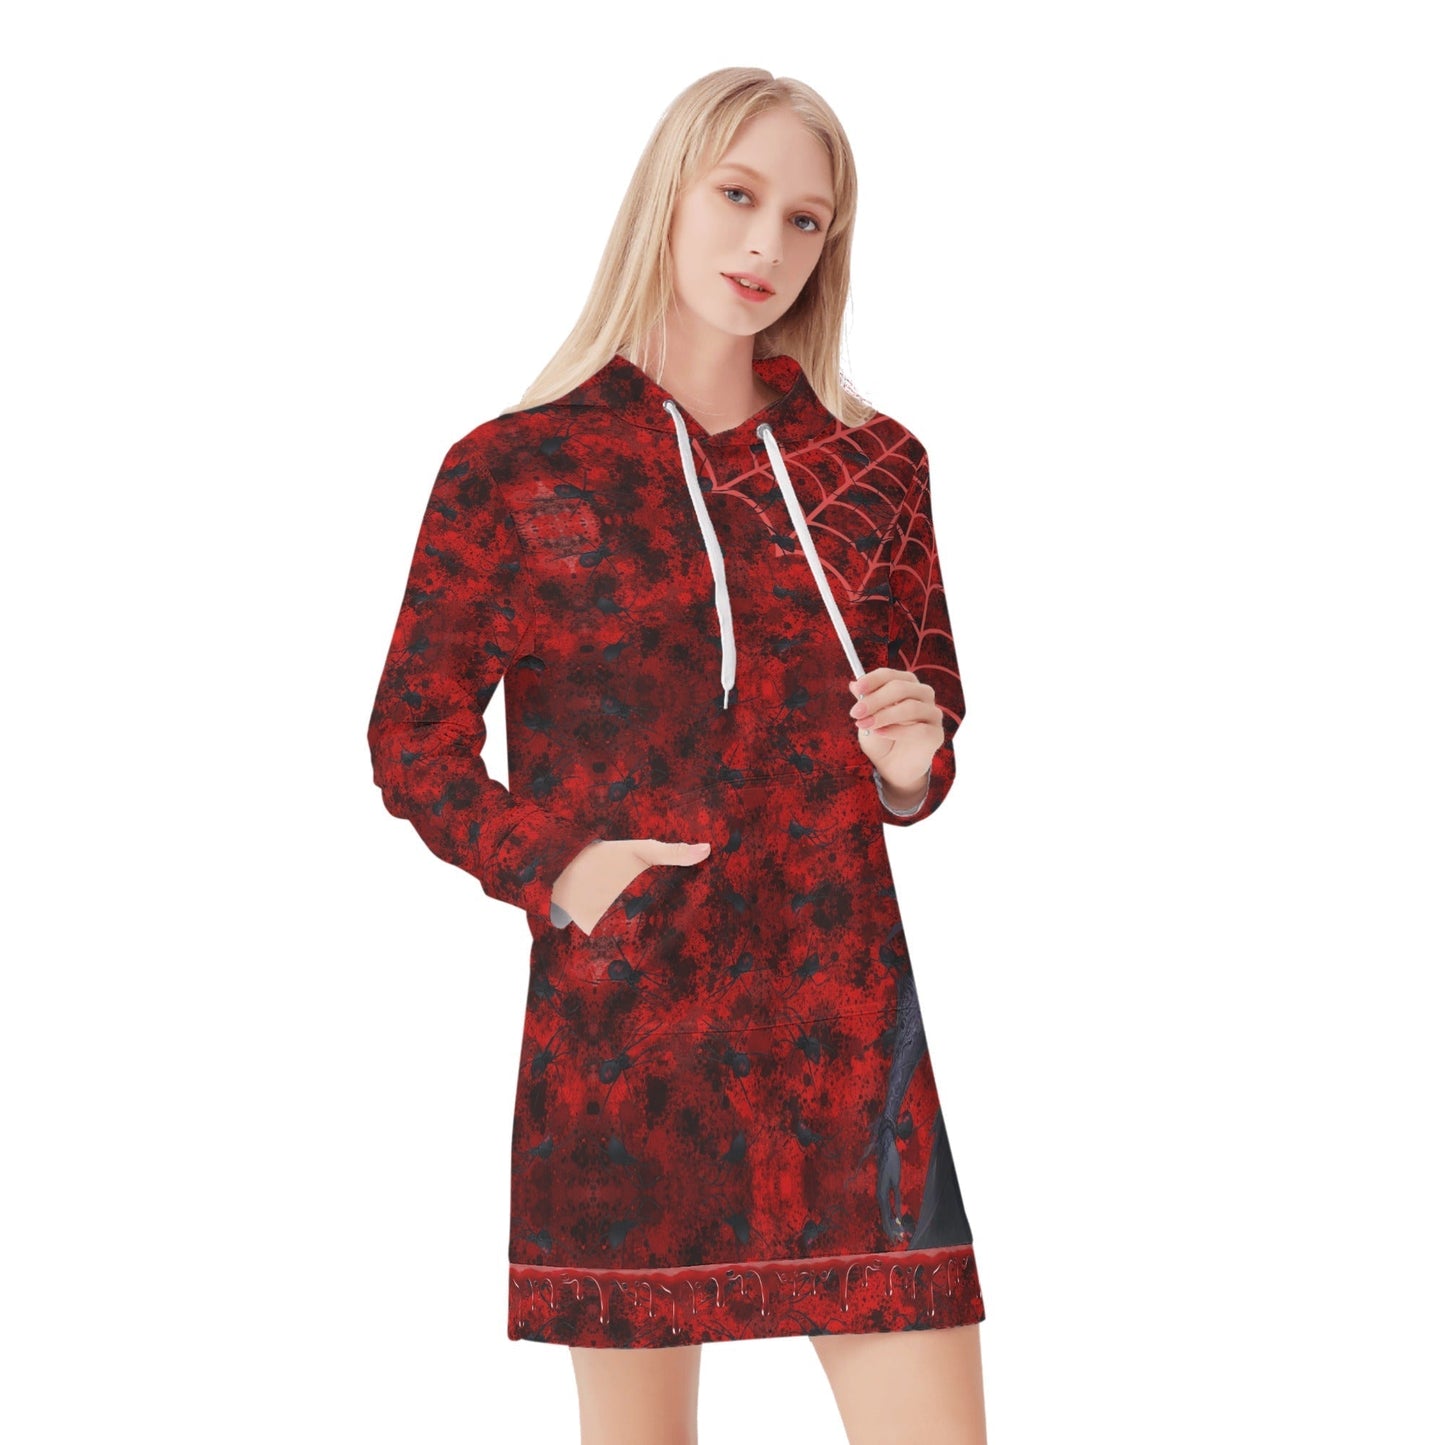 Stand out  with the  Spider Queen Womens Hoodie Dress  available at Hey Nugget. Grab yours today!